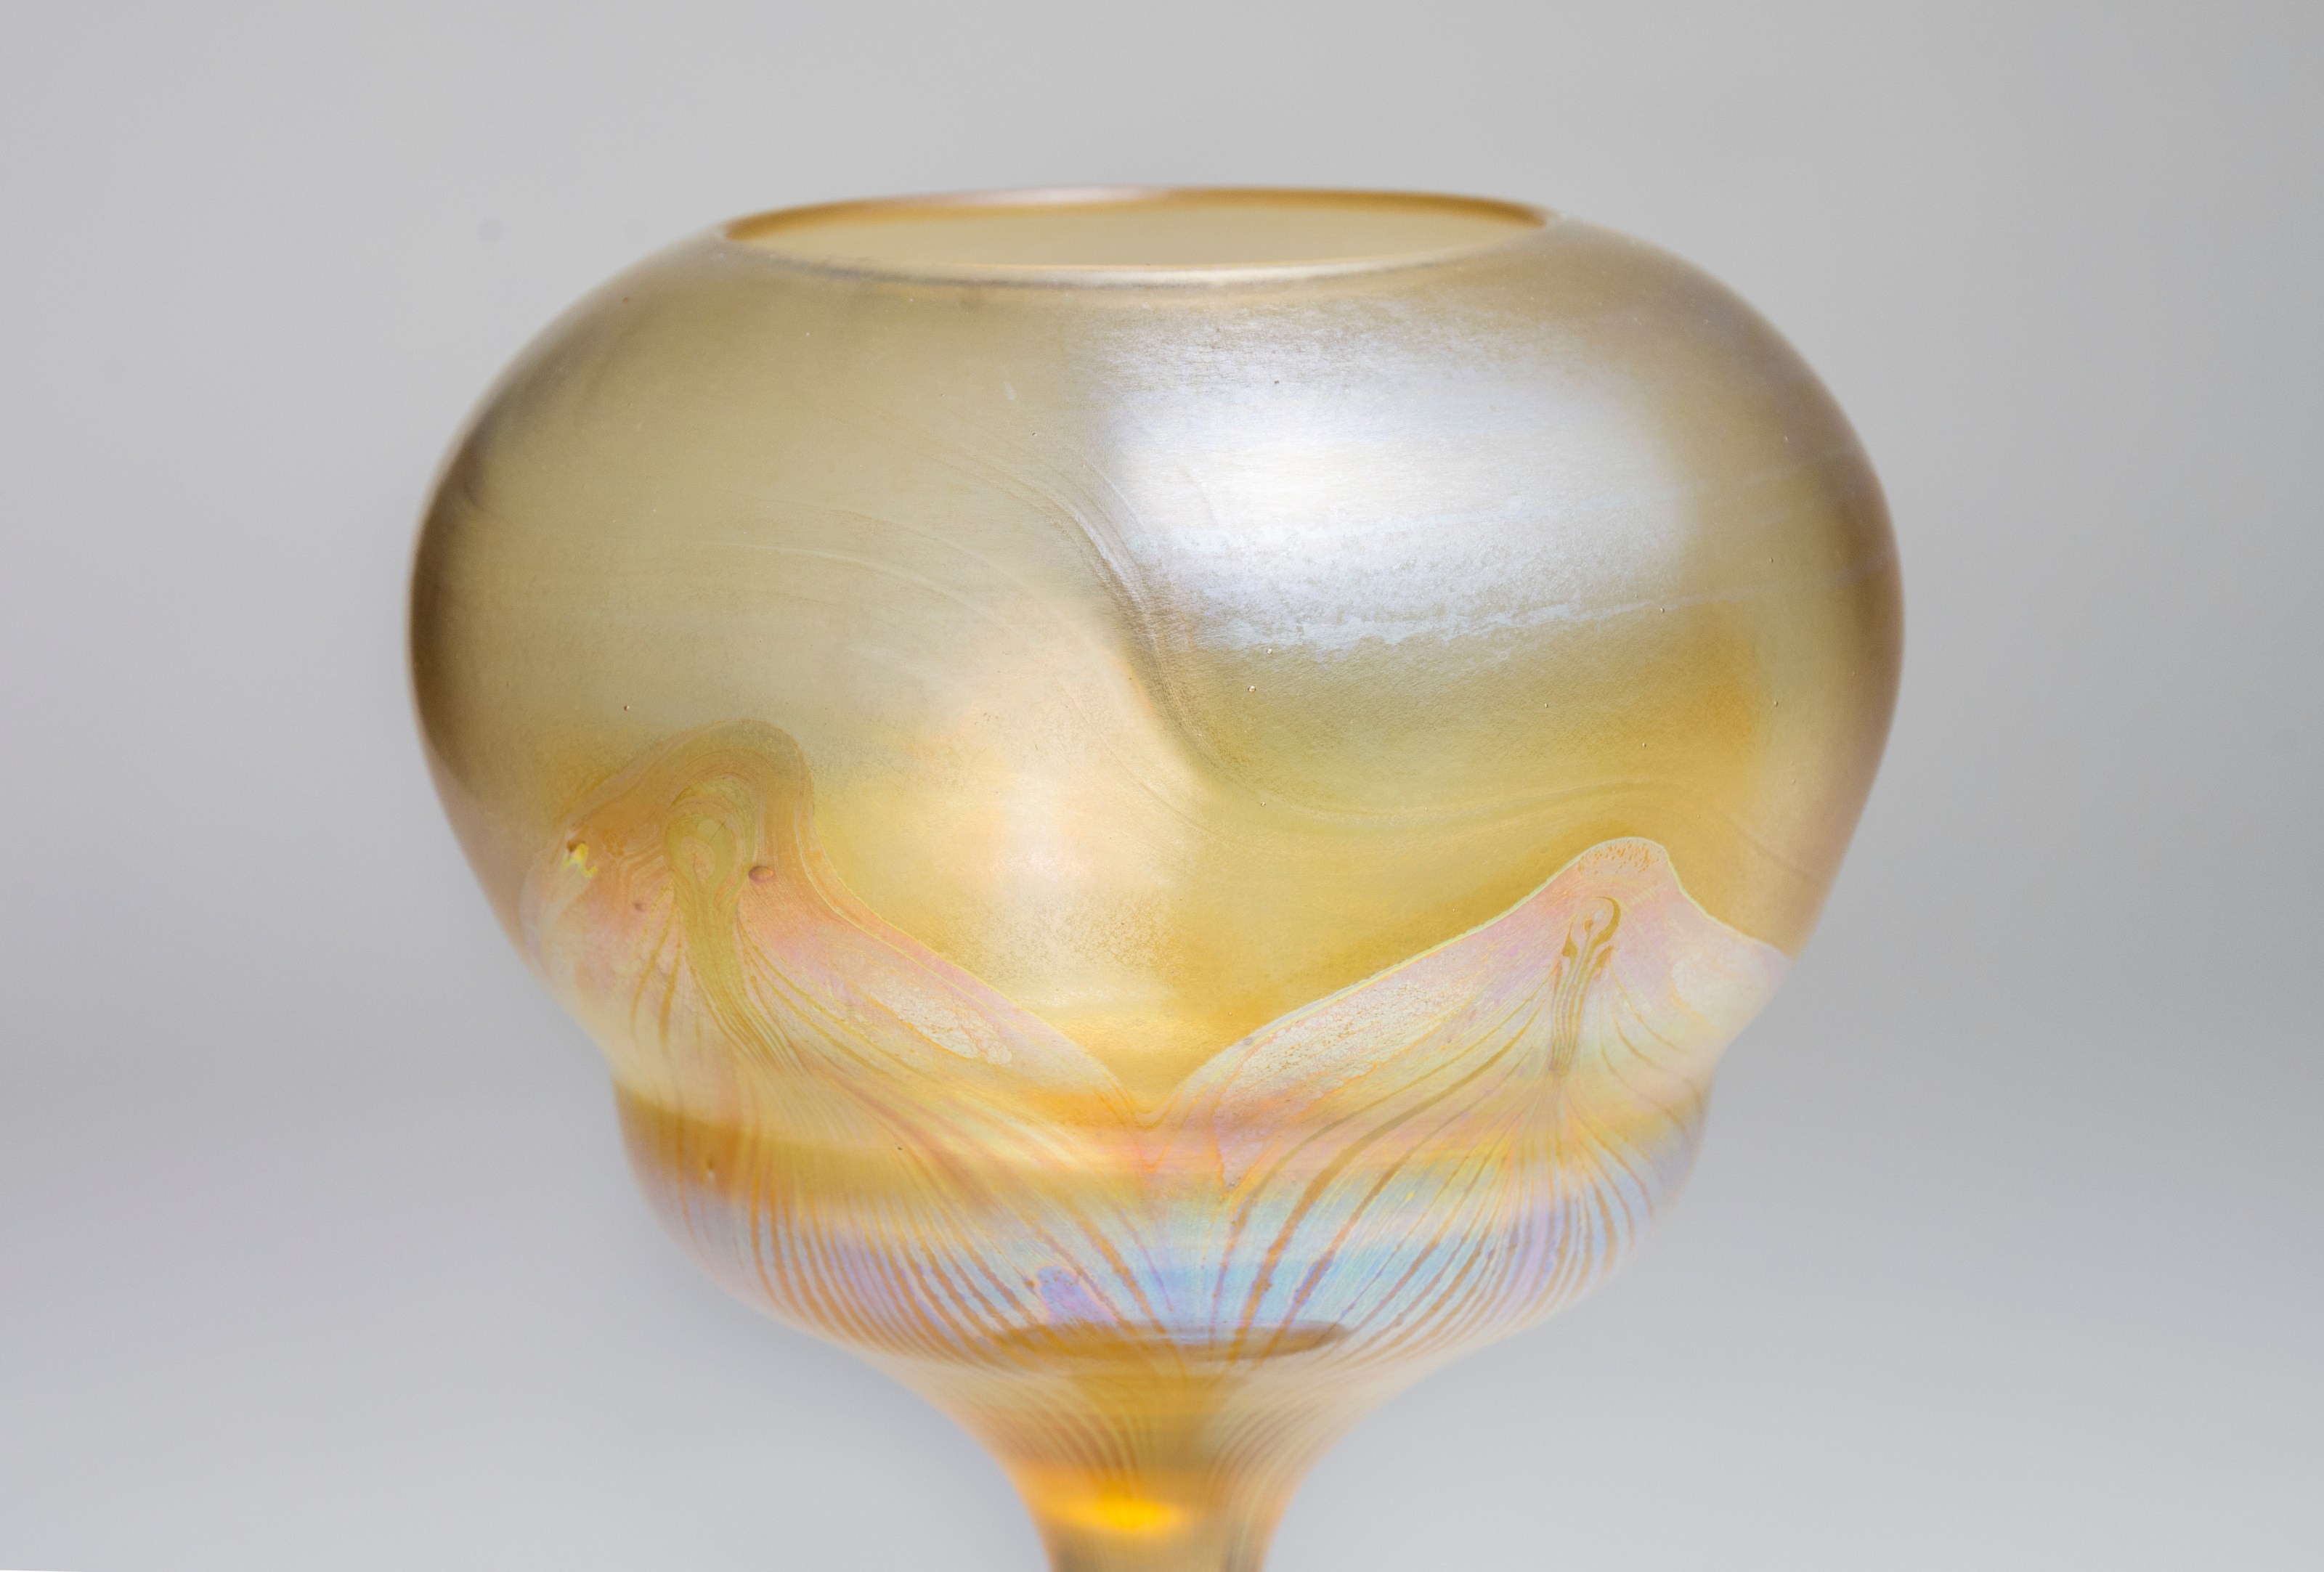 the flower cup of the tiffany favrile glass flower form showing the surface sheen of the transparent yellow glass and the contrast of the iridescent swag decoration